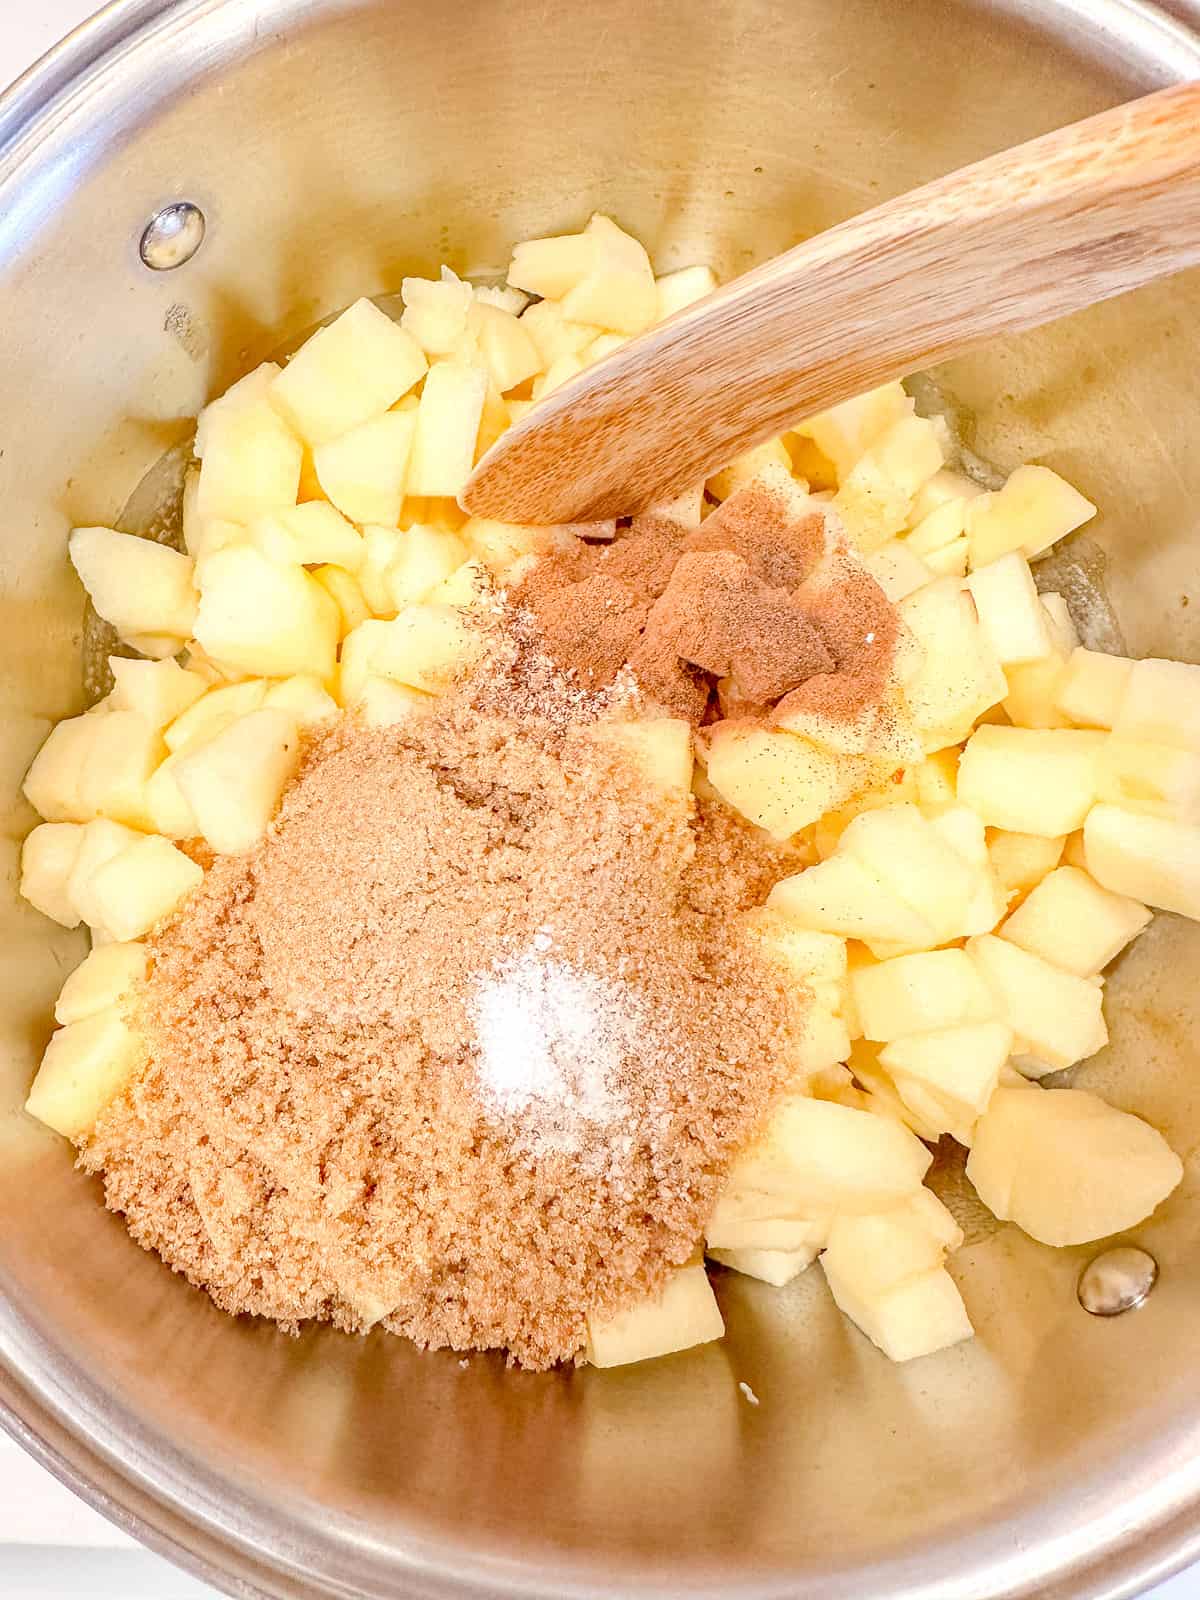 Adding cinnamon and spices to diced apples.